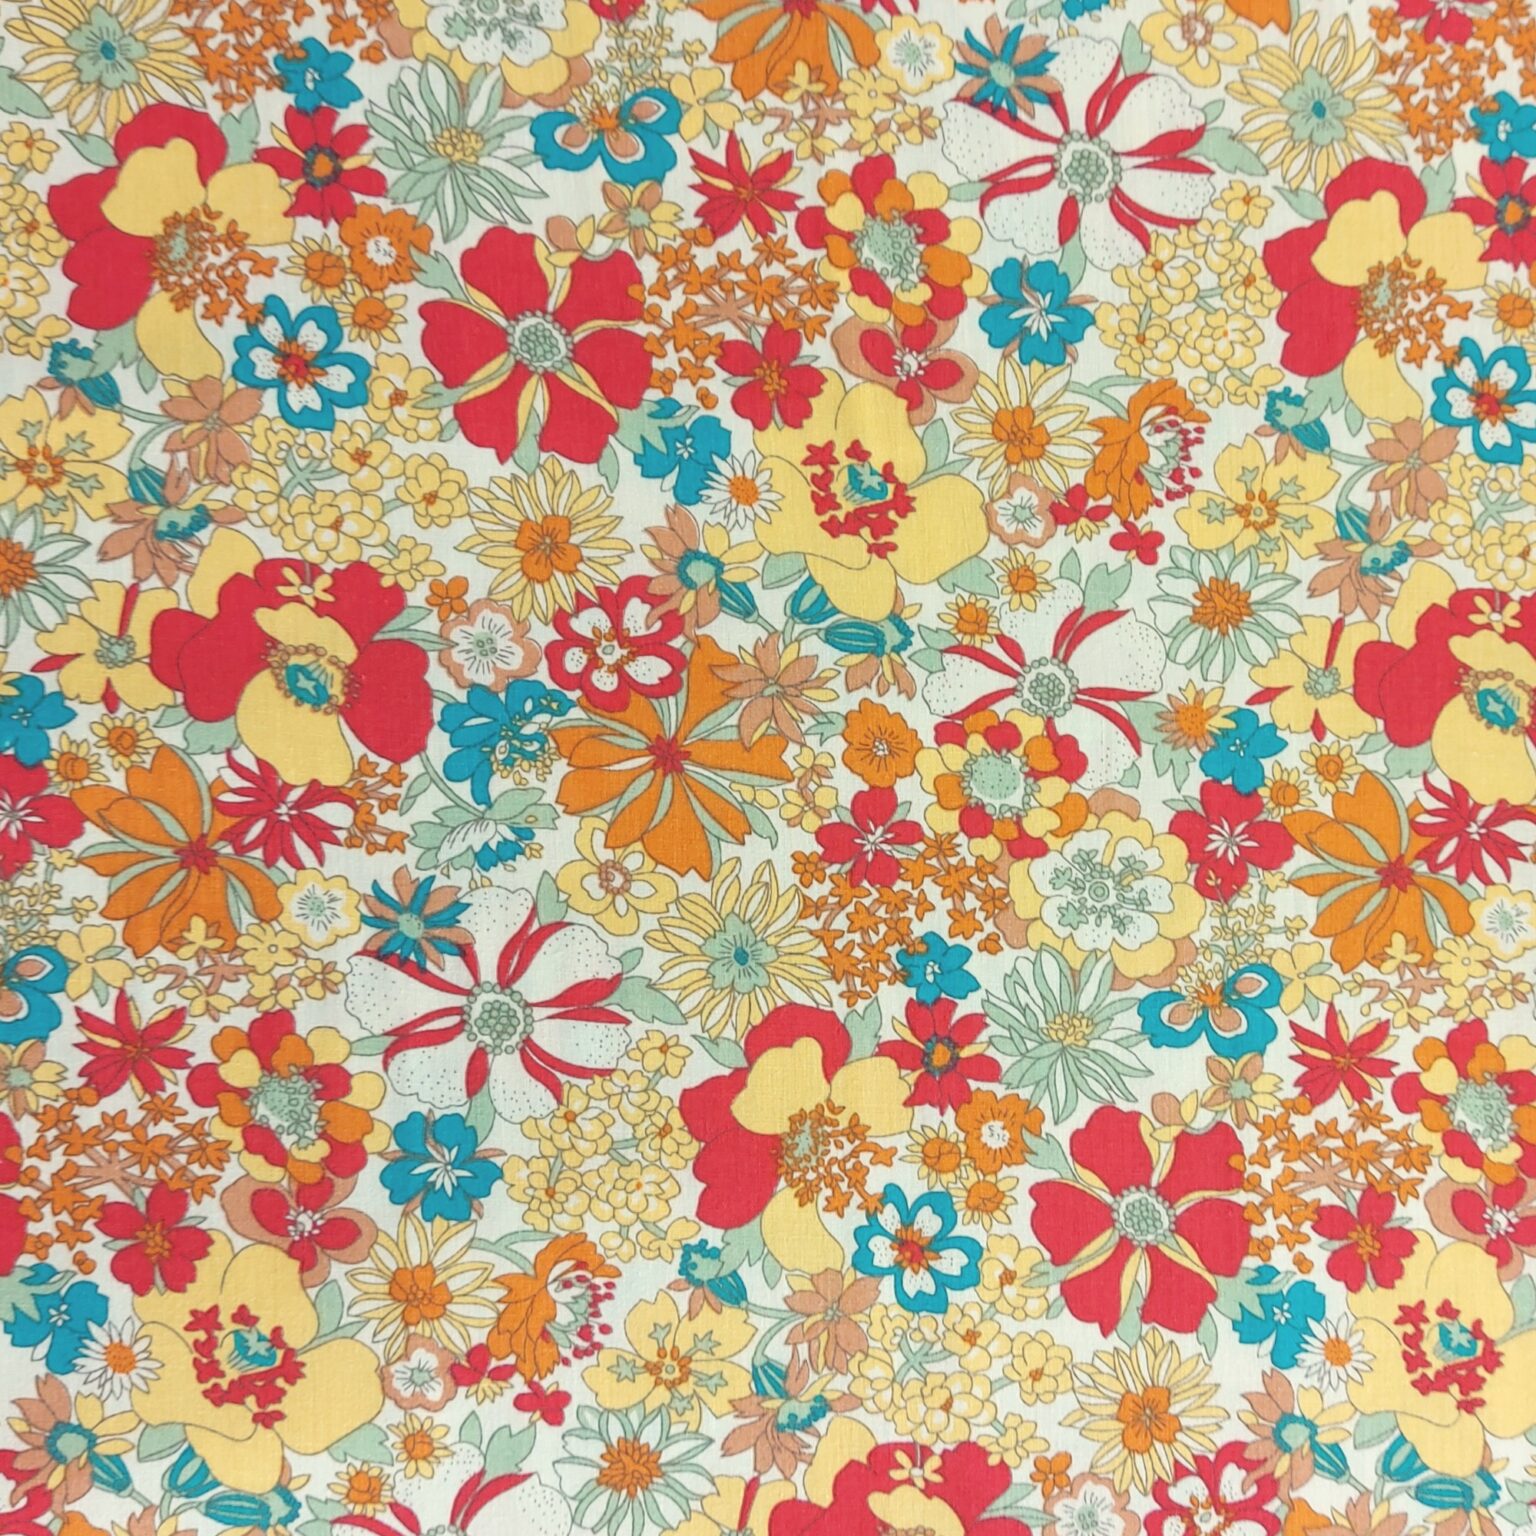 Funky Floral on Cream Cotton Fabric | More Sewing